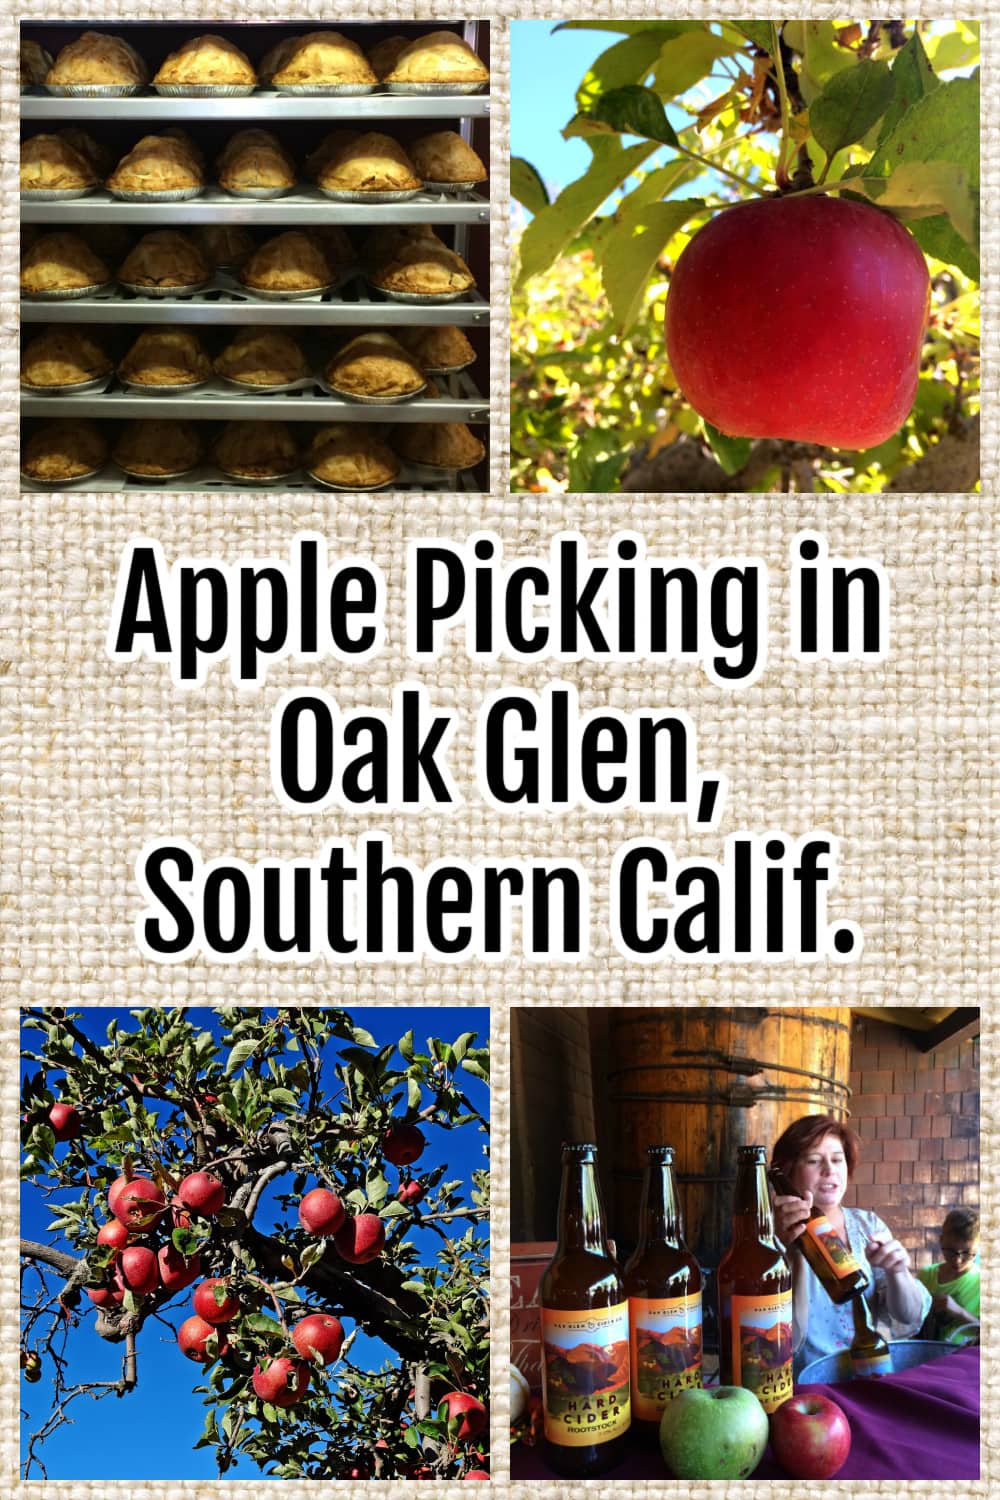 Collage of photos on apple picking in Oak Glen, Southern California